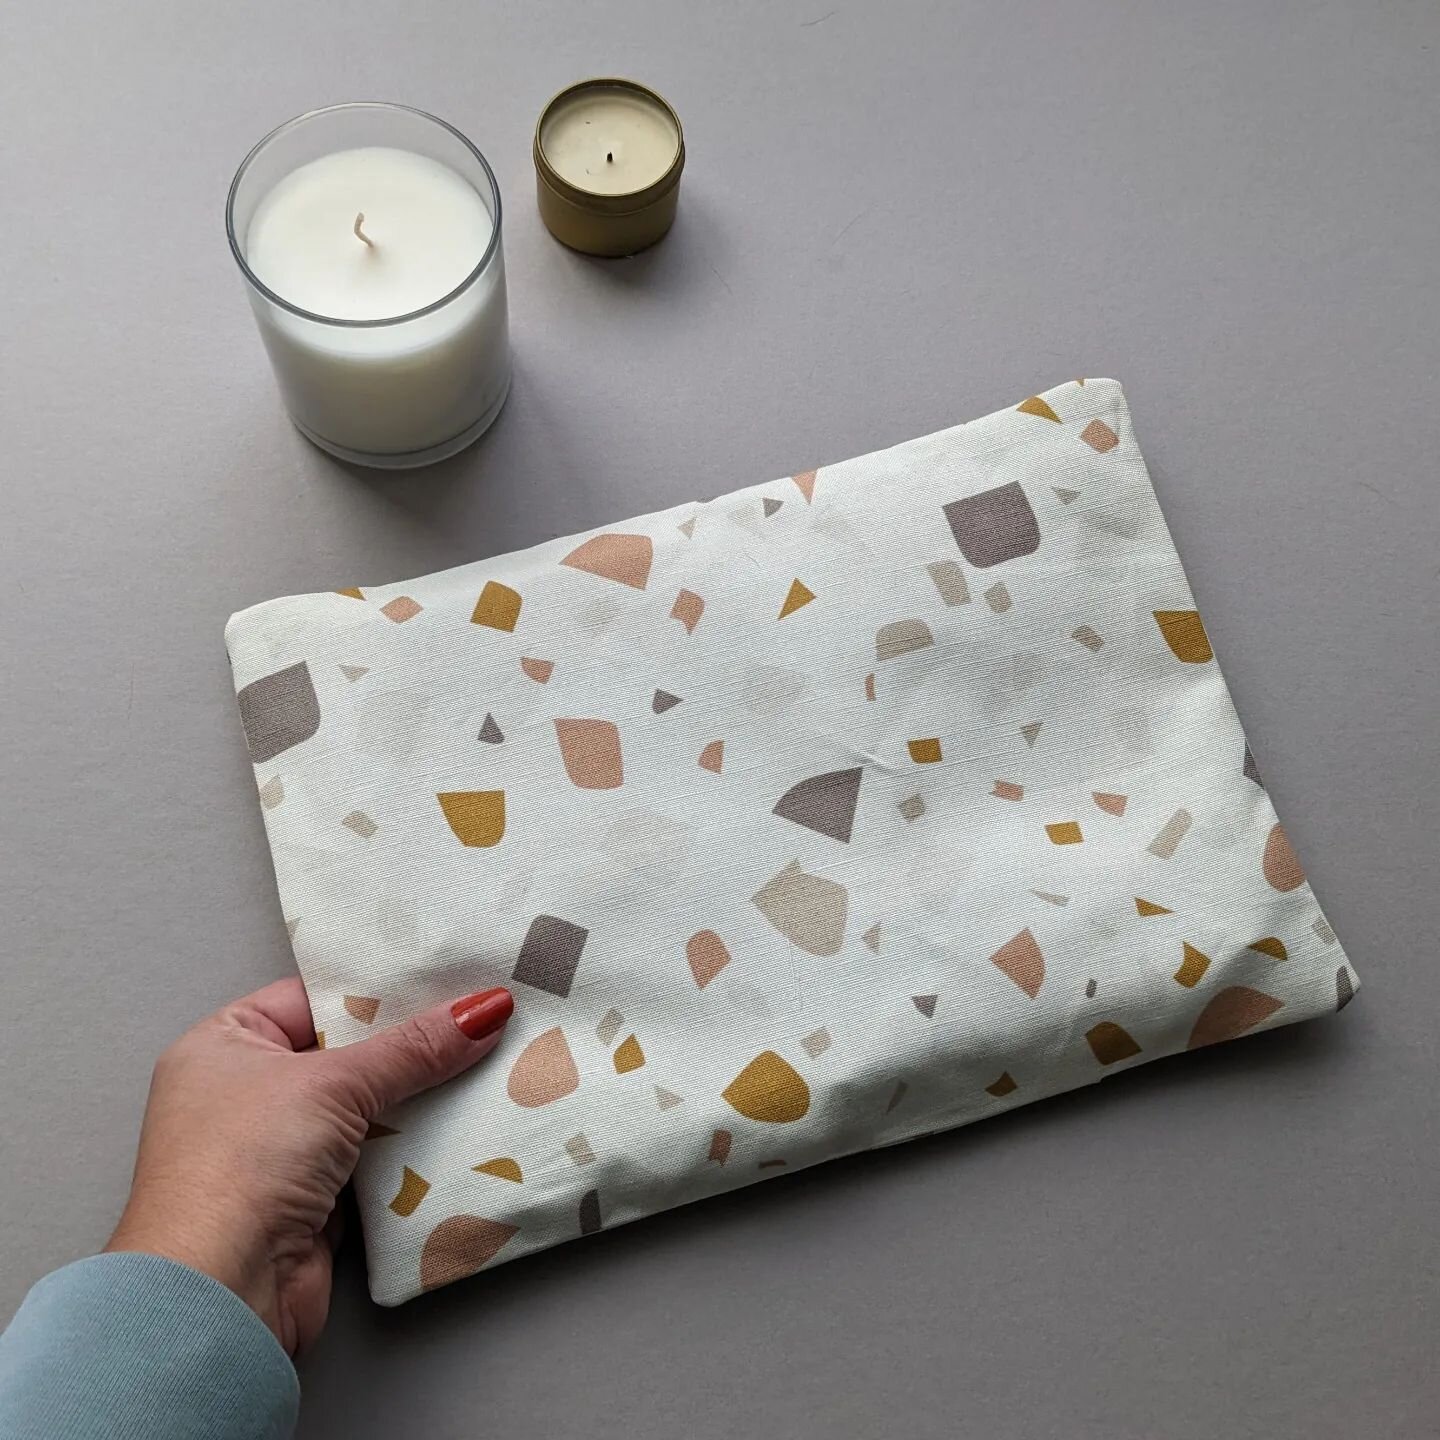 Buckwheat hot/cold packs will soon be available at the Made for me Marketplace in Toronto! Check them out in person starting March 15📍1586 Dundas St. W.

#smallbusiness #buckwheat #heatpack #handmade #toronto #shopsmall #selfcare #sickday #terrazzo